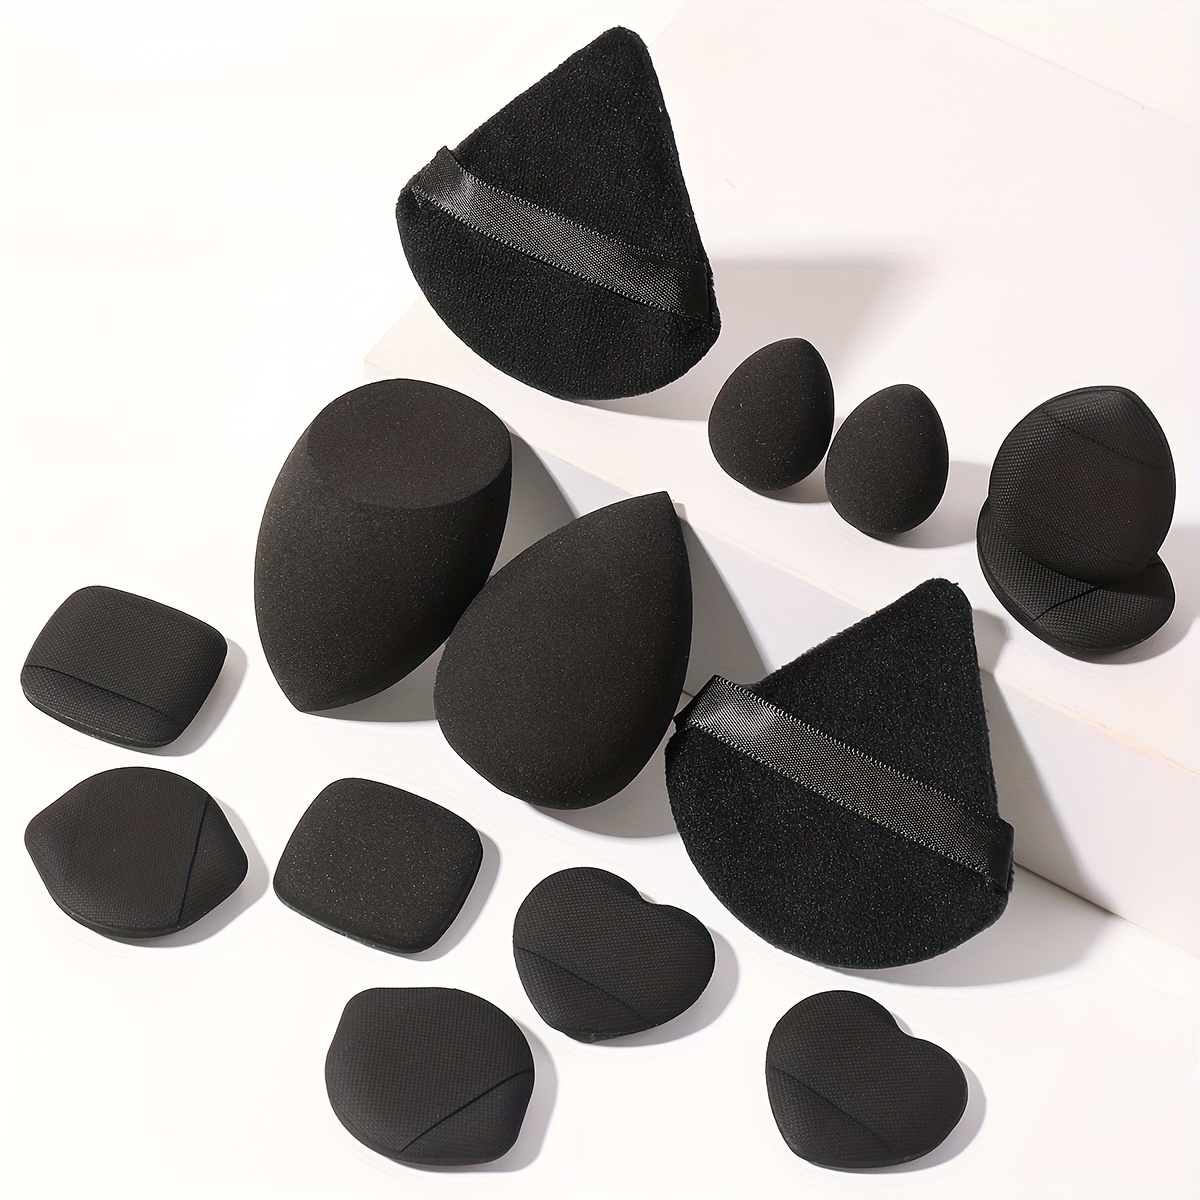 Make Up Wedges, 40 Pieces White Triangle Shape Makeup Sponge Cosmetic  Wedges Foundation Beauty Tools